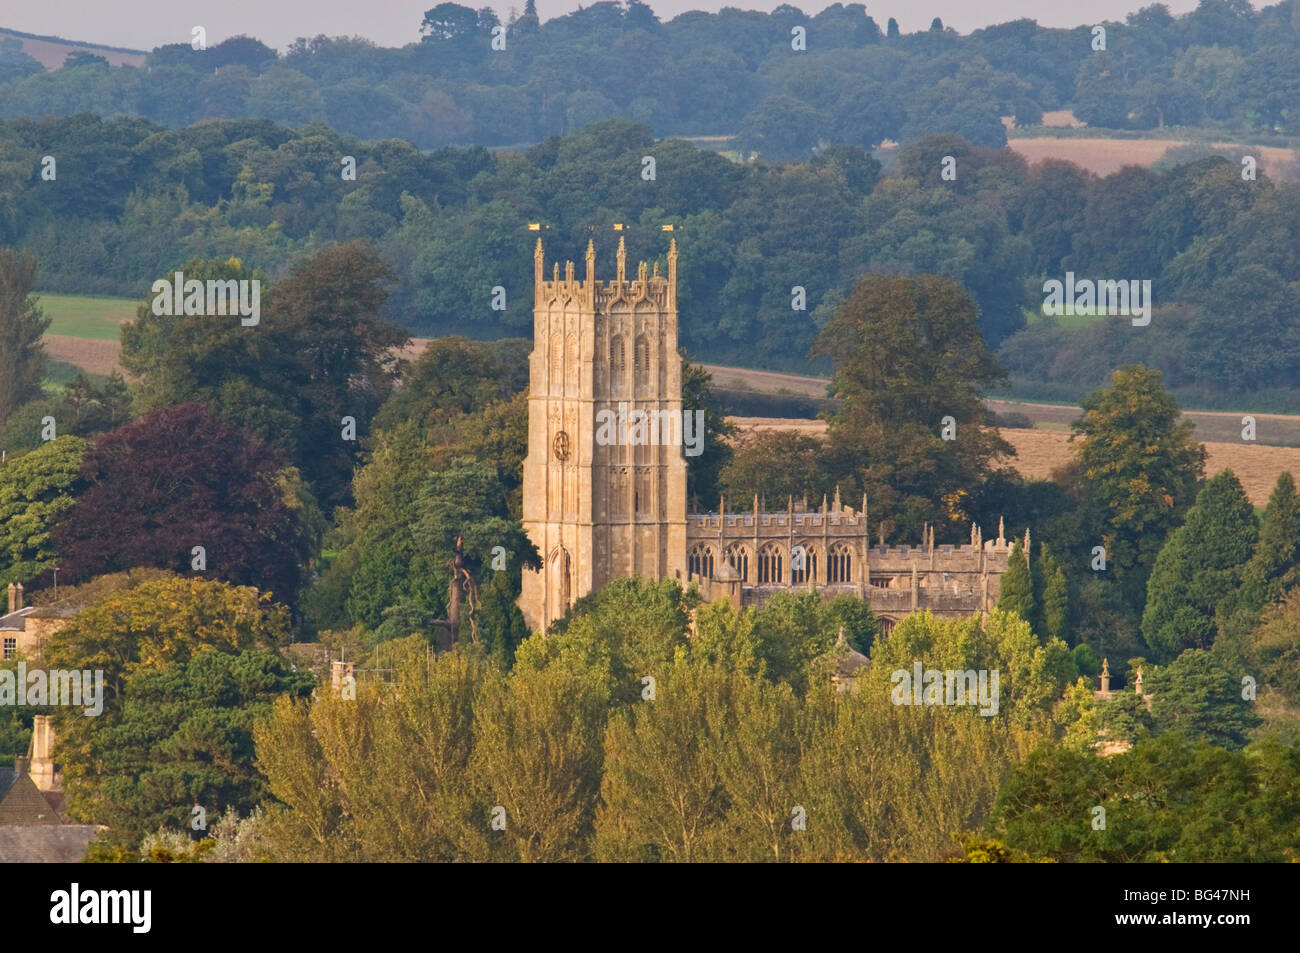 View of the church of St. James and the town of Chipping Camden, Gloucestershire, England, United Kingdom, Europe Stock Photo